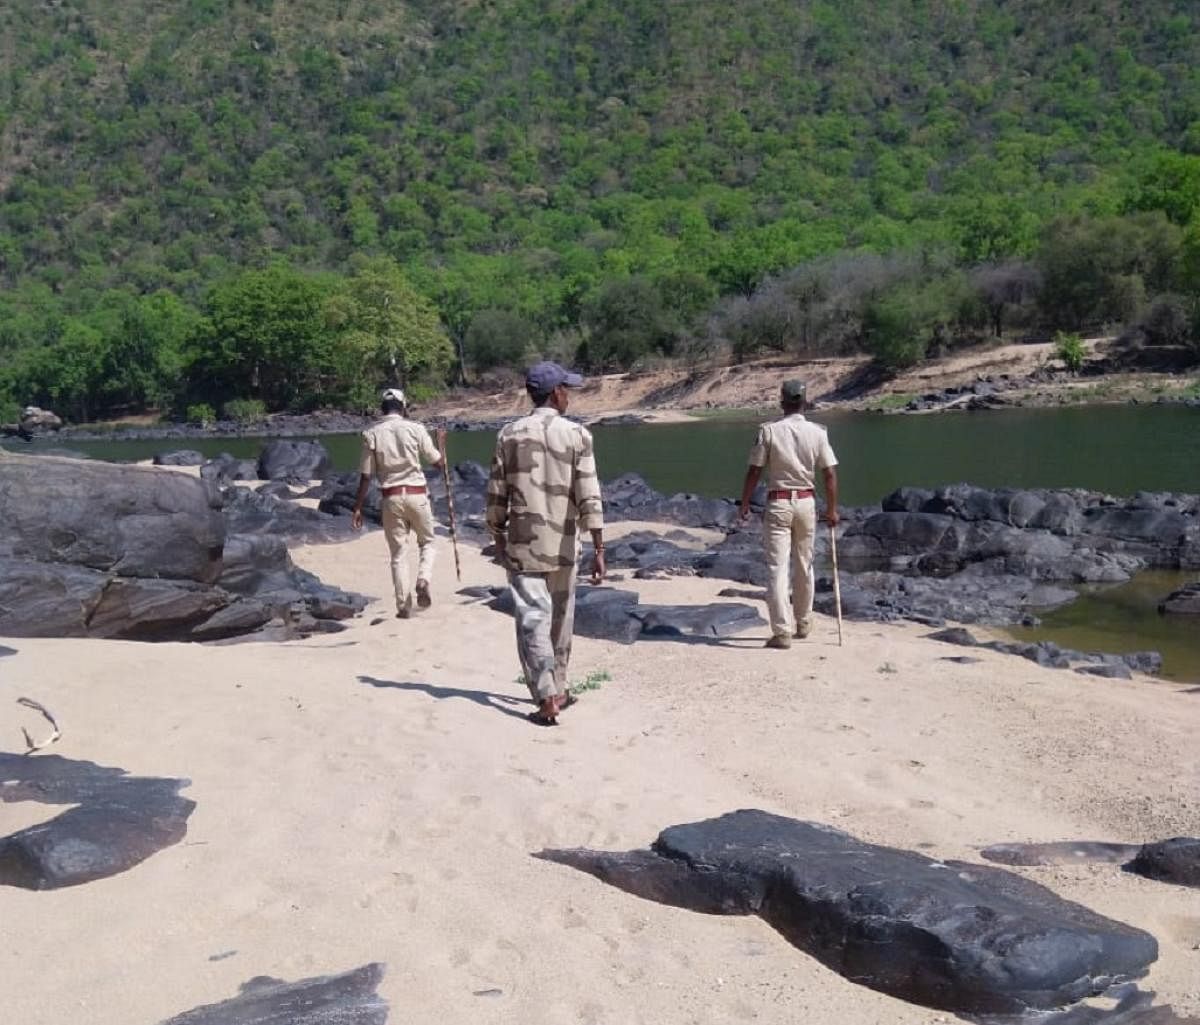 Forest department personnel patrol on the banks of River Cauvery, at Male Mahadeshwara Wildlife Sanctuary. DH PHOTO